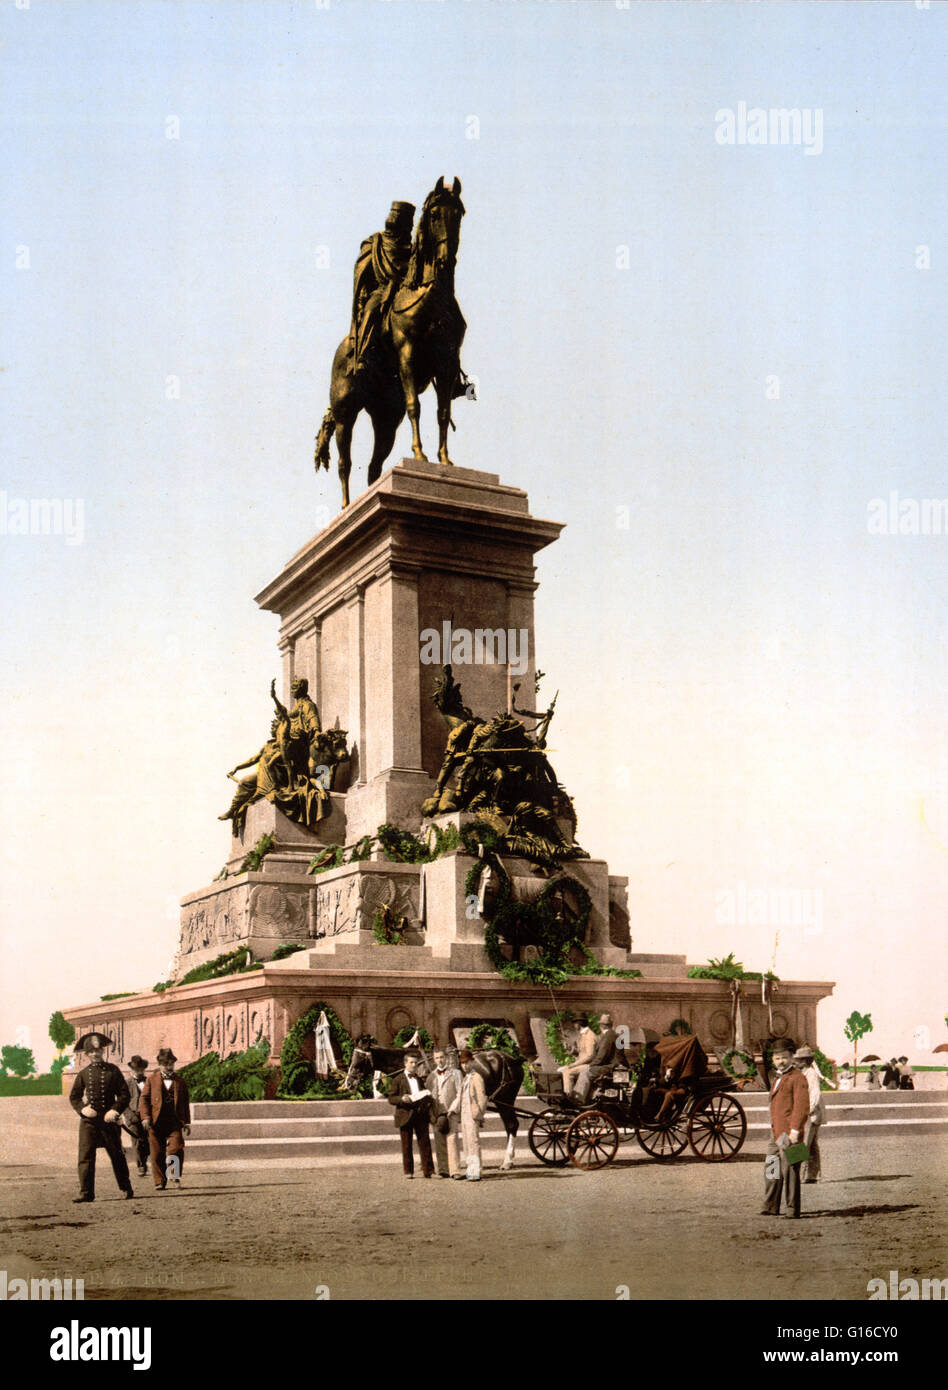 The equestrian monument dedicated to Giuseppe Garibaldi is an imposing equestrian statue placed in Rome on the highest point of the Janiculum Hill. The monument consists of a bronze statue portraying the hero riding a horse, which is placed on a big marbl Stock Photo